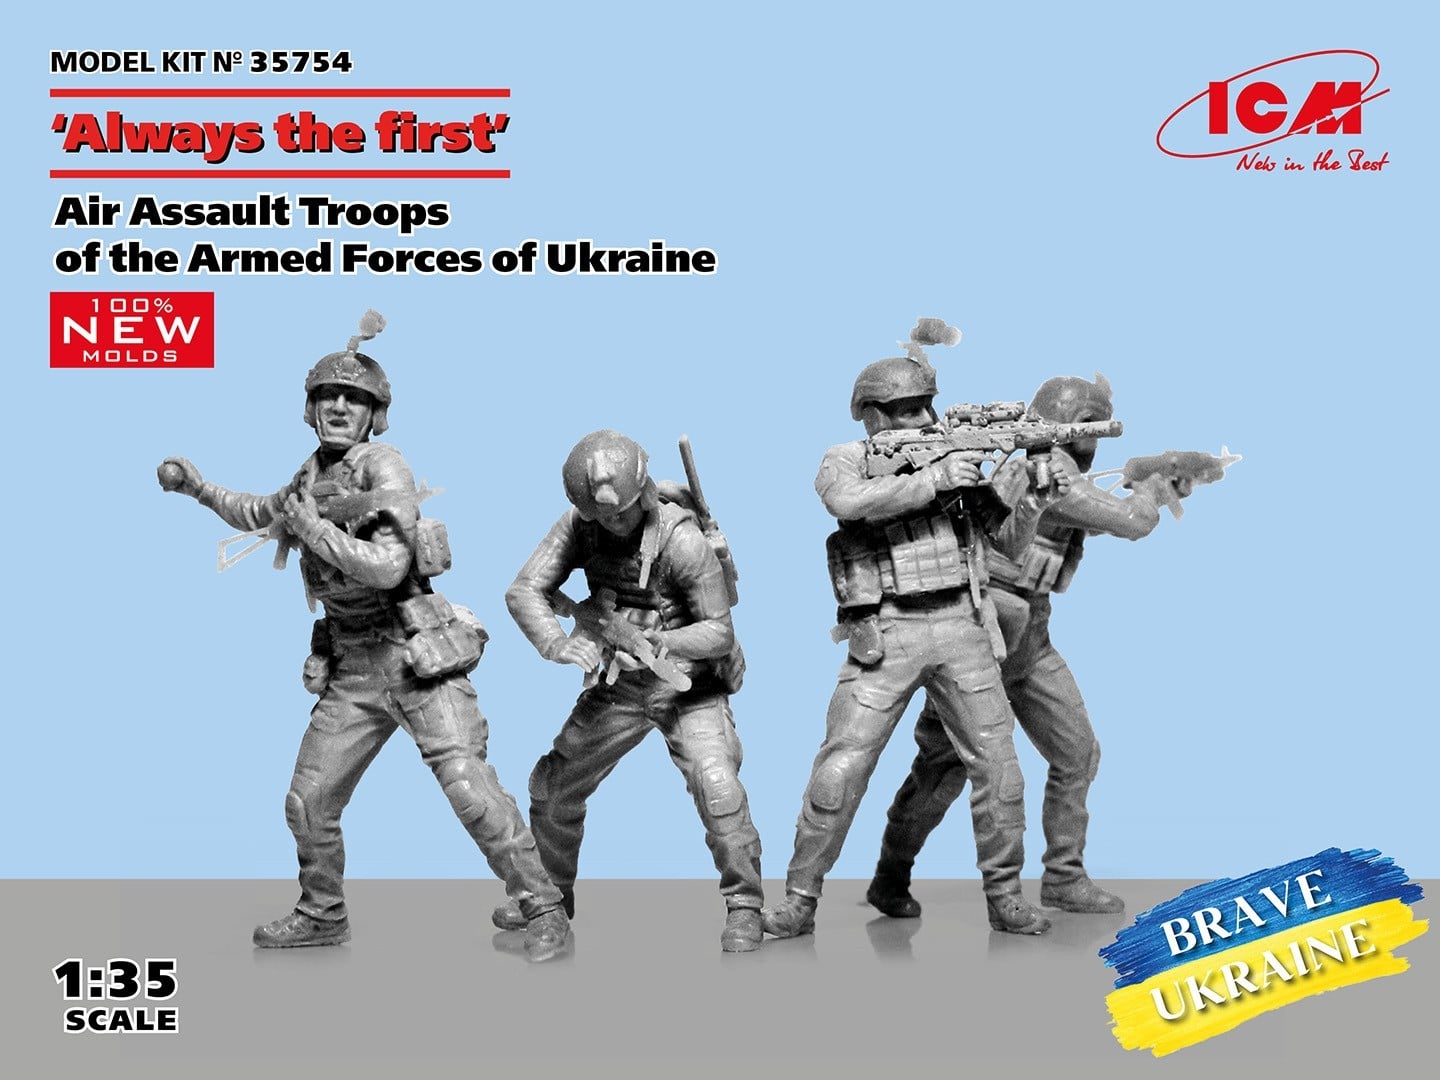 ICM Models to Release "Always the First" 1:35 Scale Air Assault Troops of the Armed Forces of Ukraine